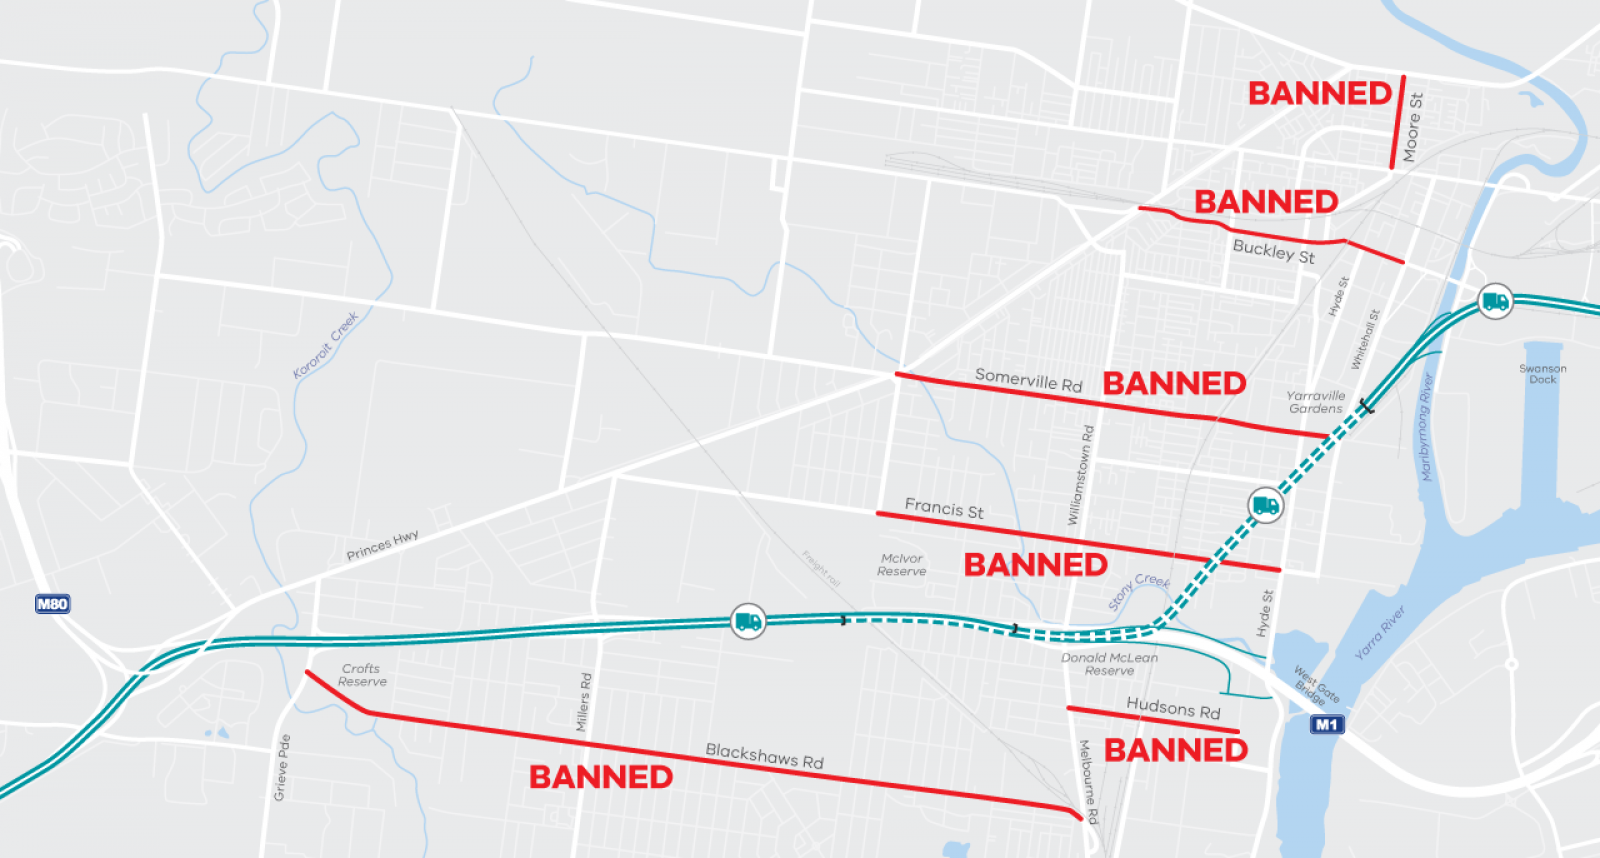 Map highlighting local roads where trucks will be banned once the project is completed